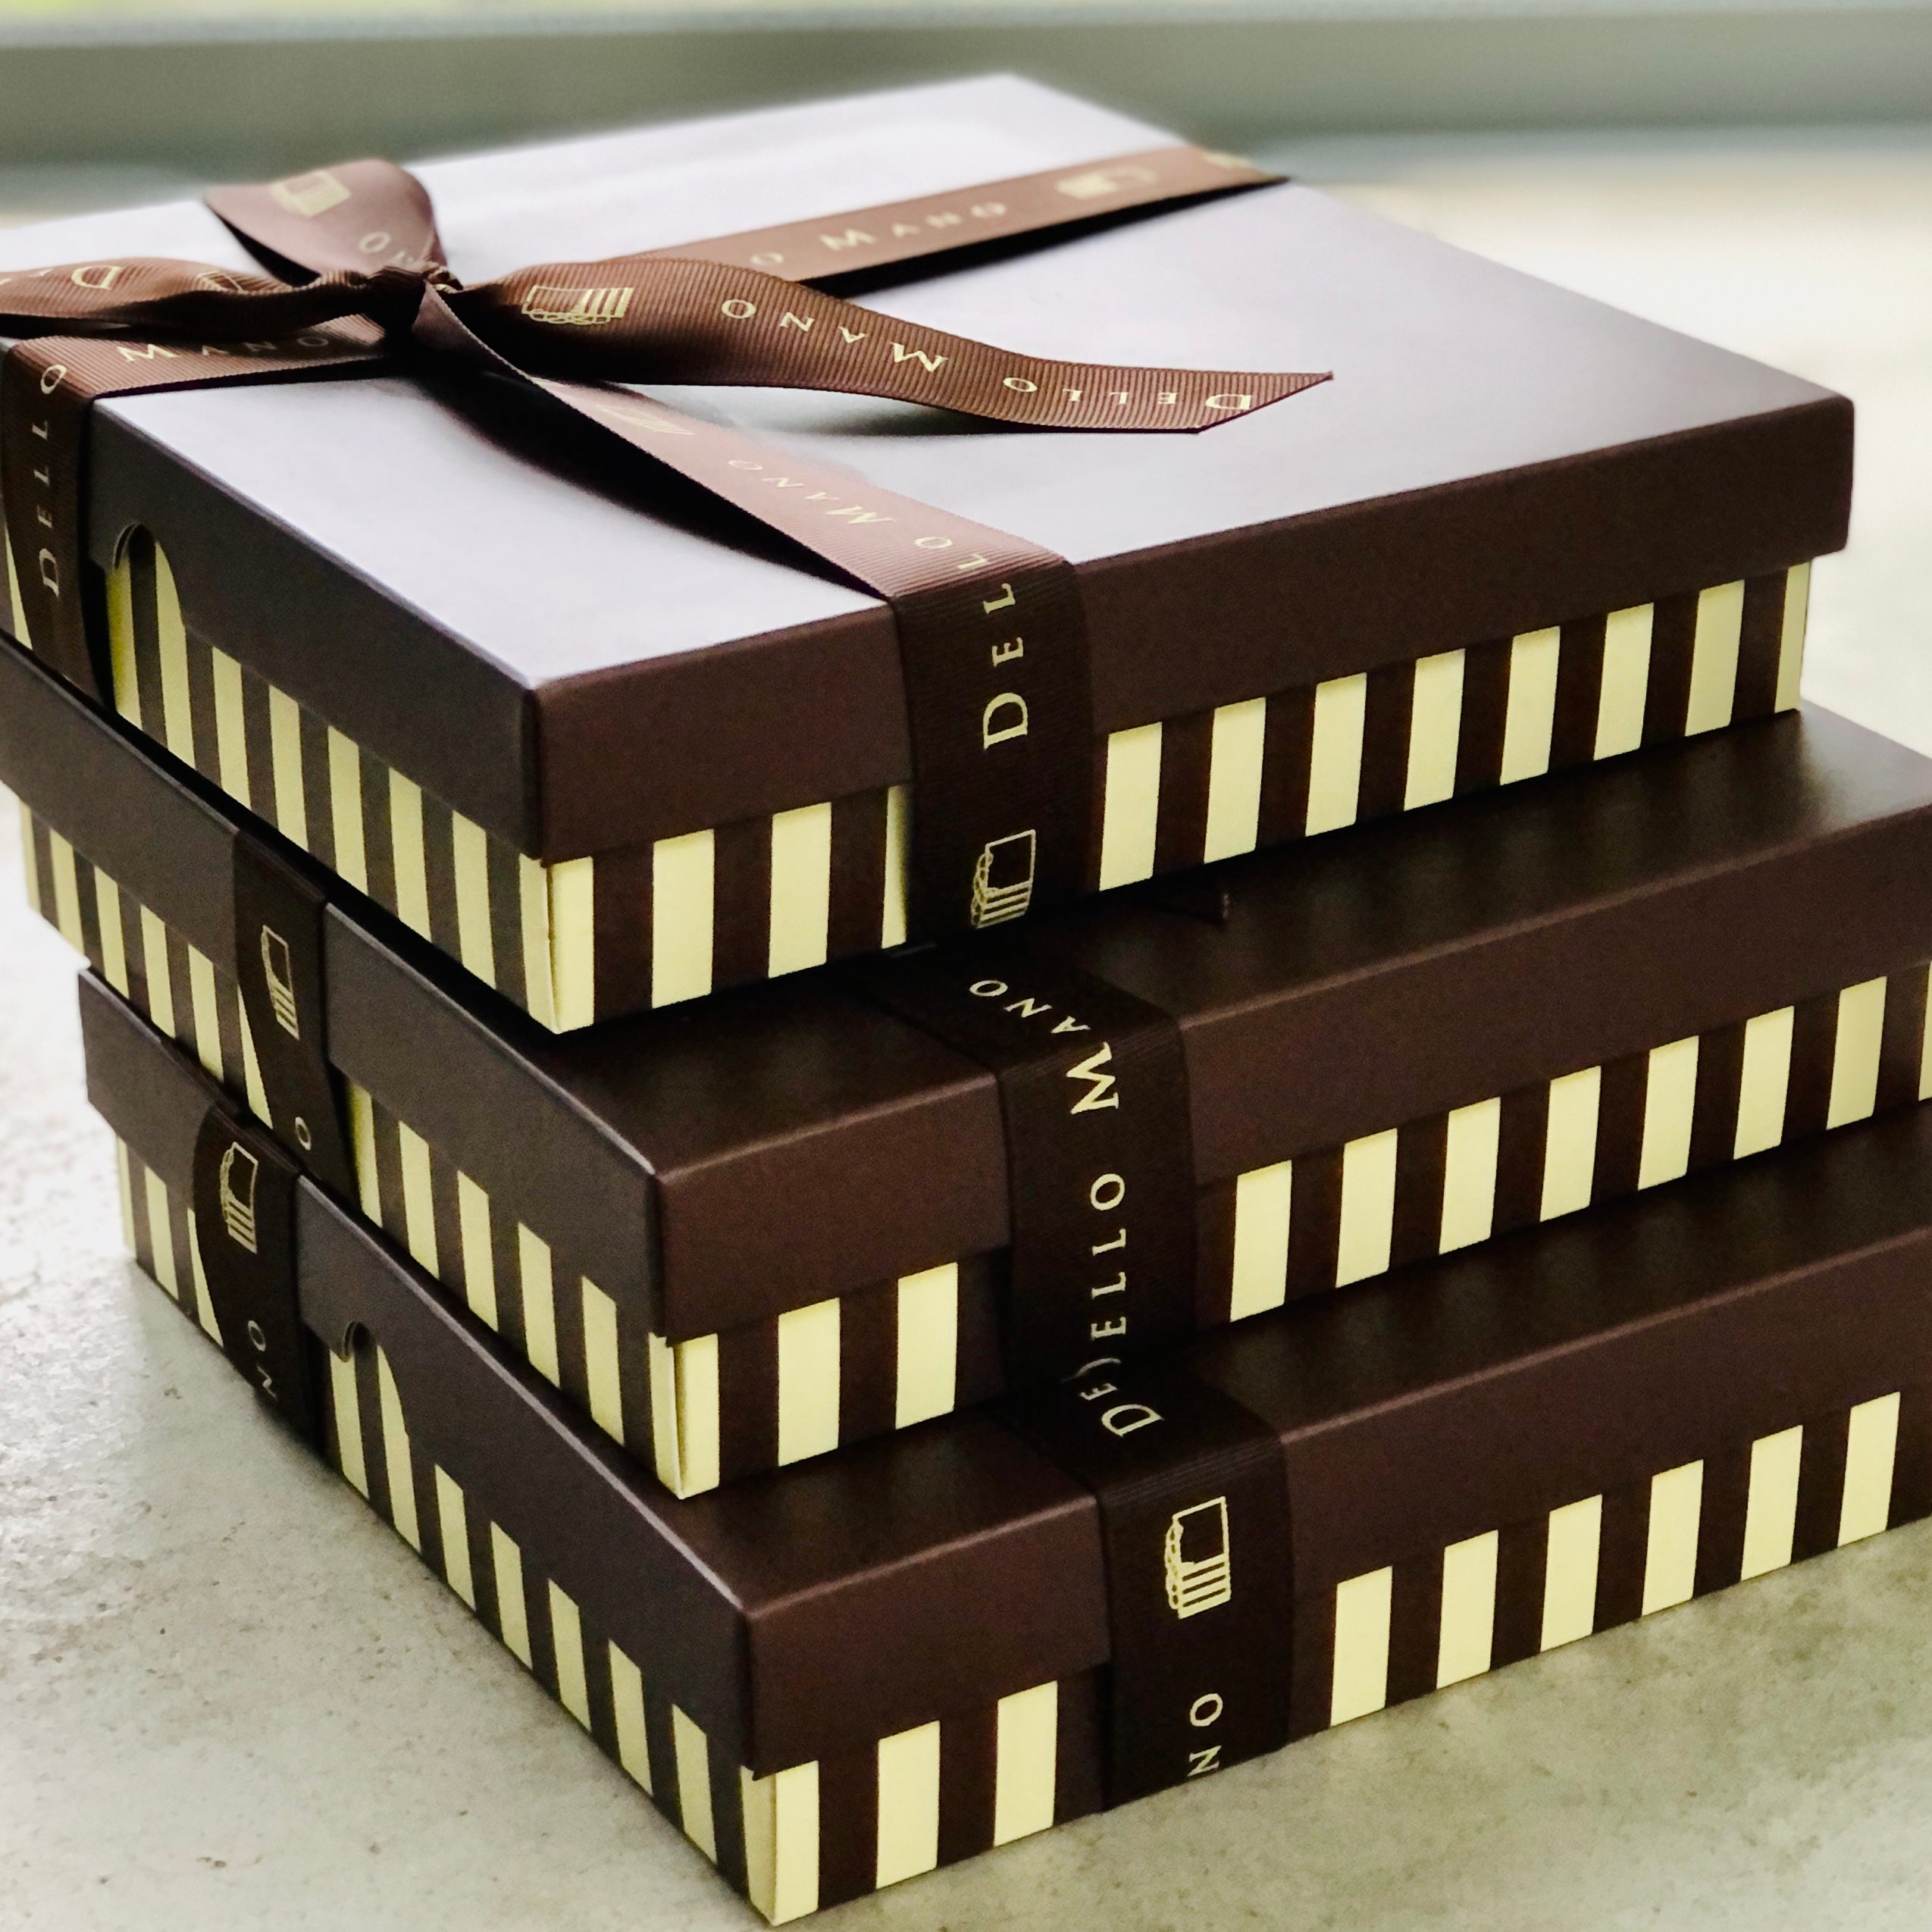 A stack of 3 stripped chocolate brownie gift boxes each with grossgrain ribbon that is embroidered to say Dello Mano